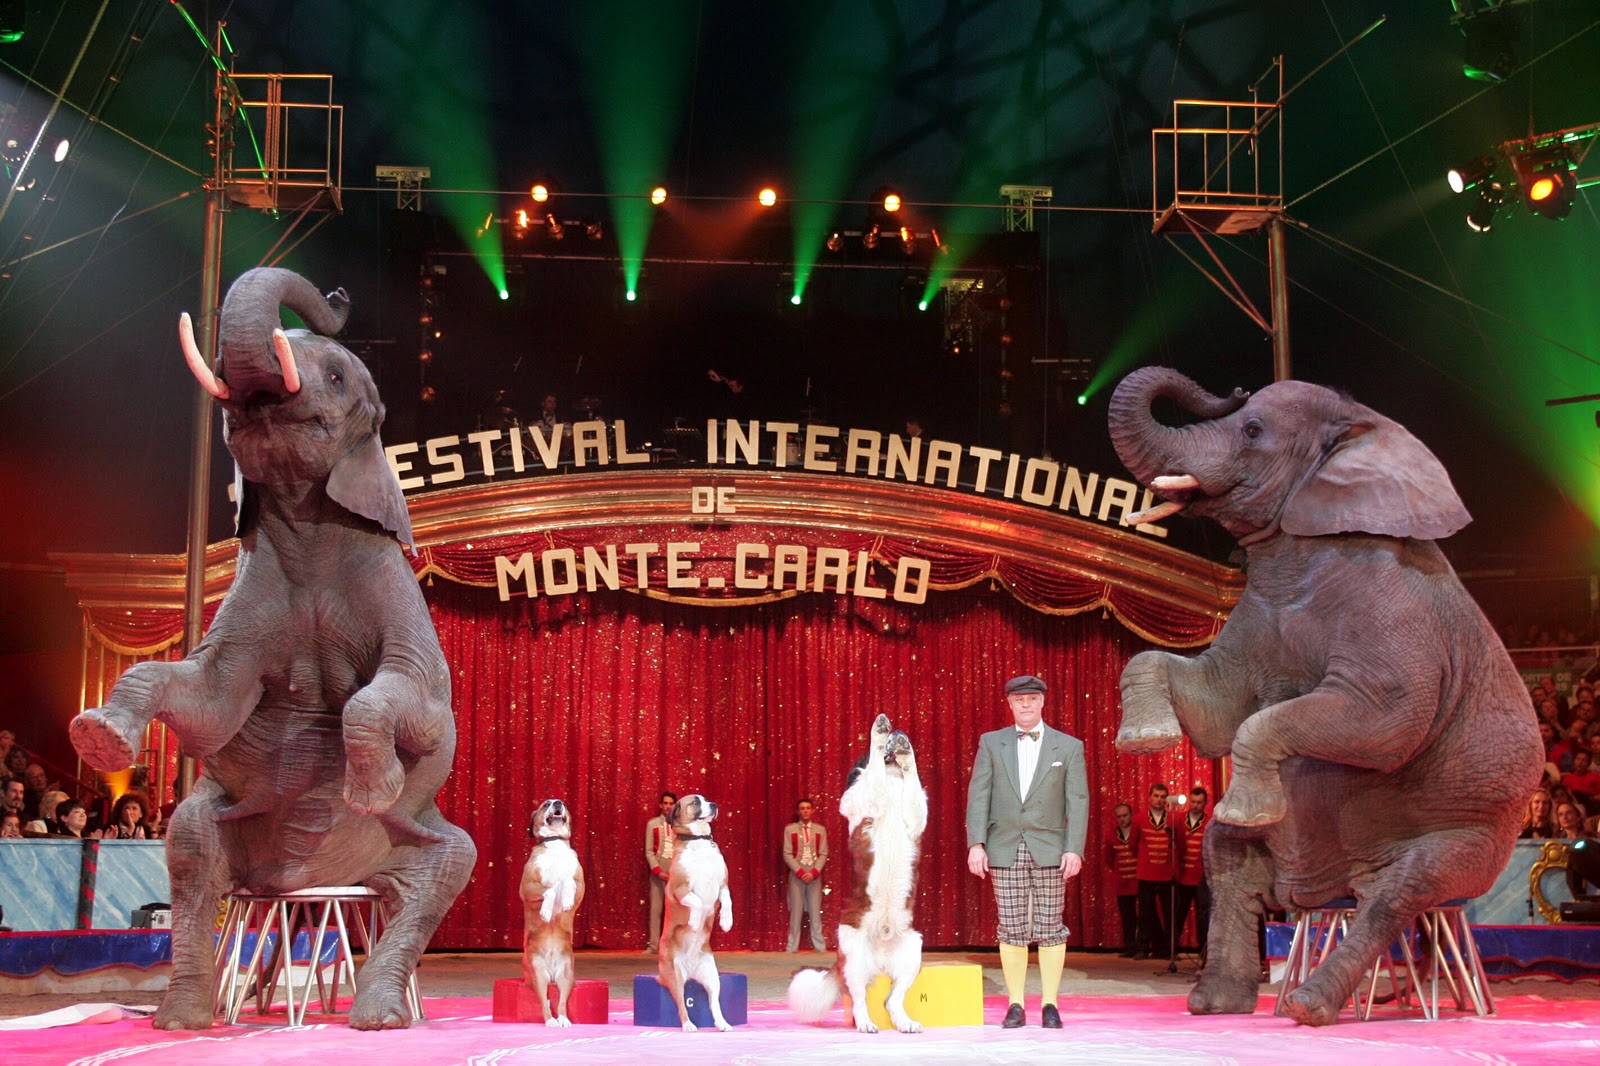 DECK THE HOLIDAY'S INTERNATIONAL CIRCUS FESTIVAL OF MONTECARLO!!